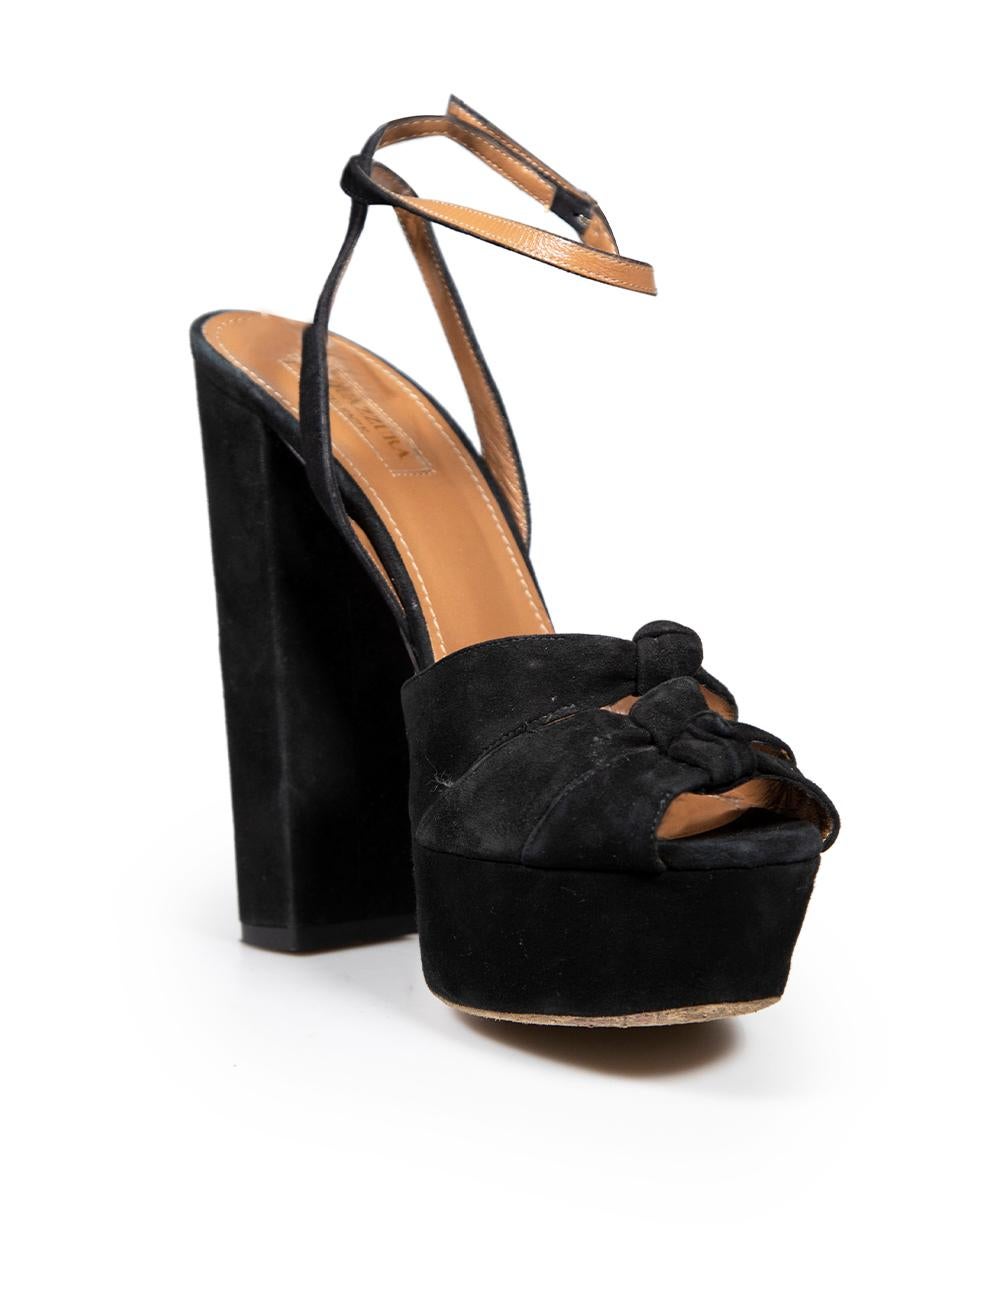 CONDITION is Good. General wear to heels is evident. Moderate signs of wear to back of suede heels, platforms, soles and insoles on this used Aquazzura designer resale item.
 
 Details
 Black
 Suede
 Heels
 High heeled
 Platform
 Peep toe
 Front